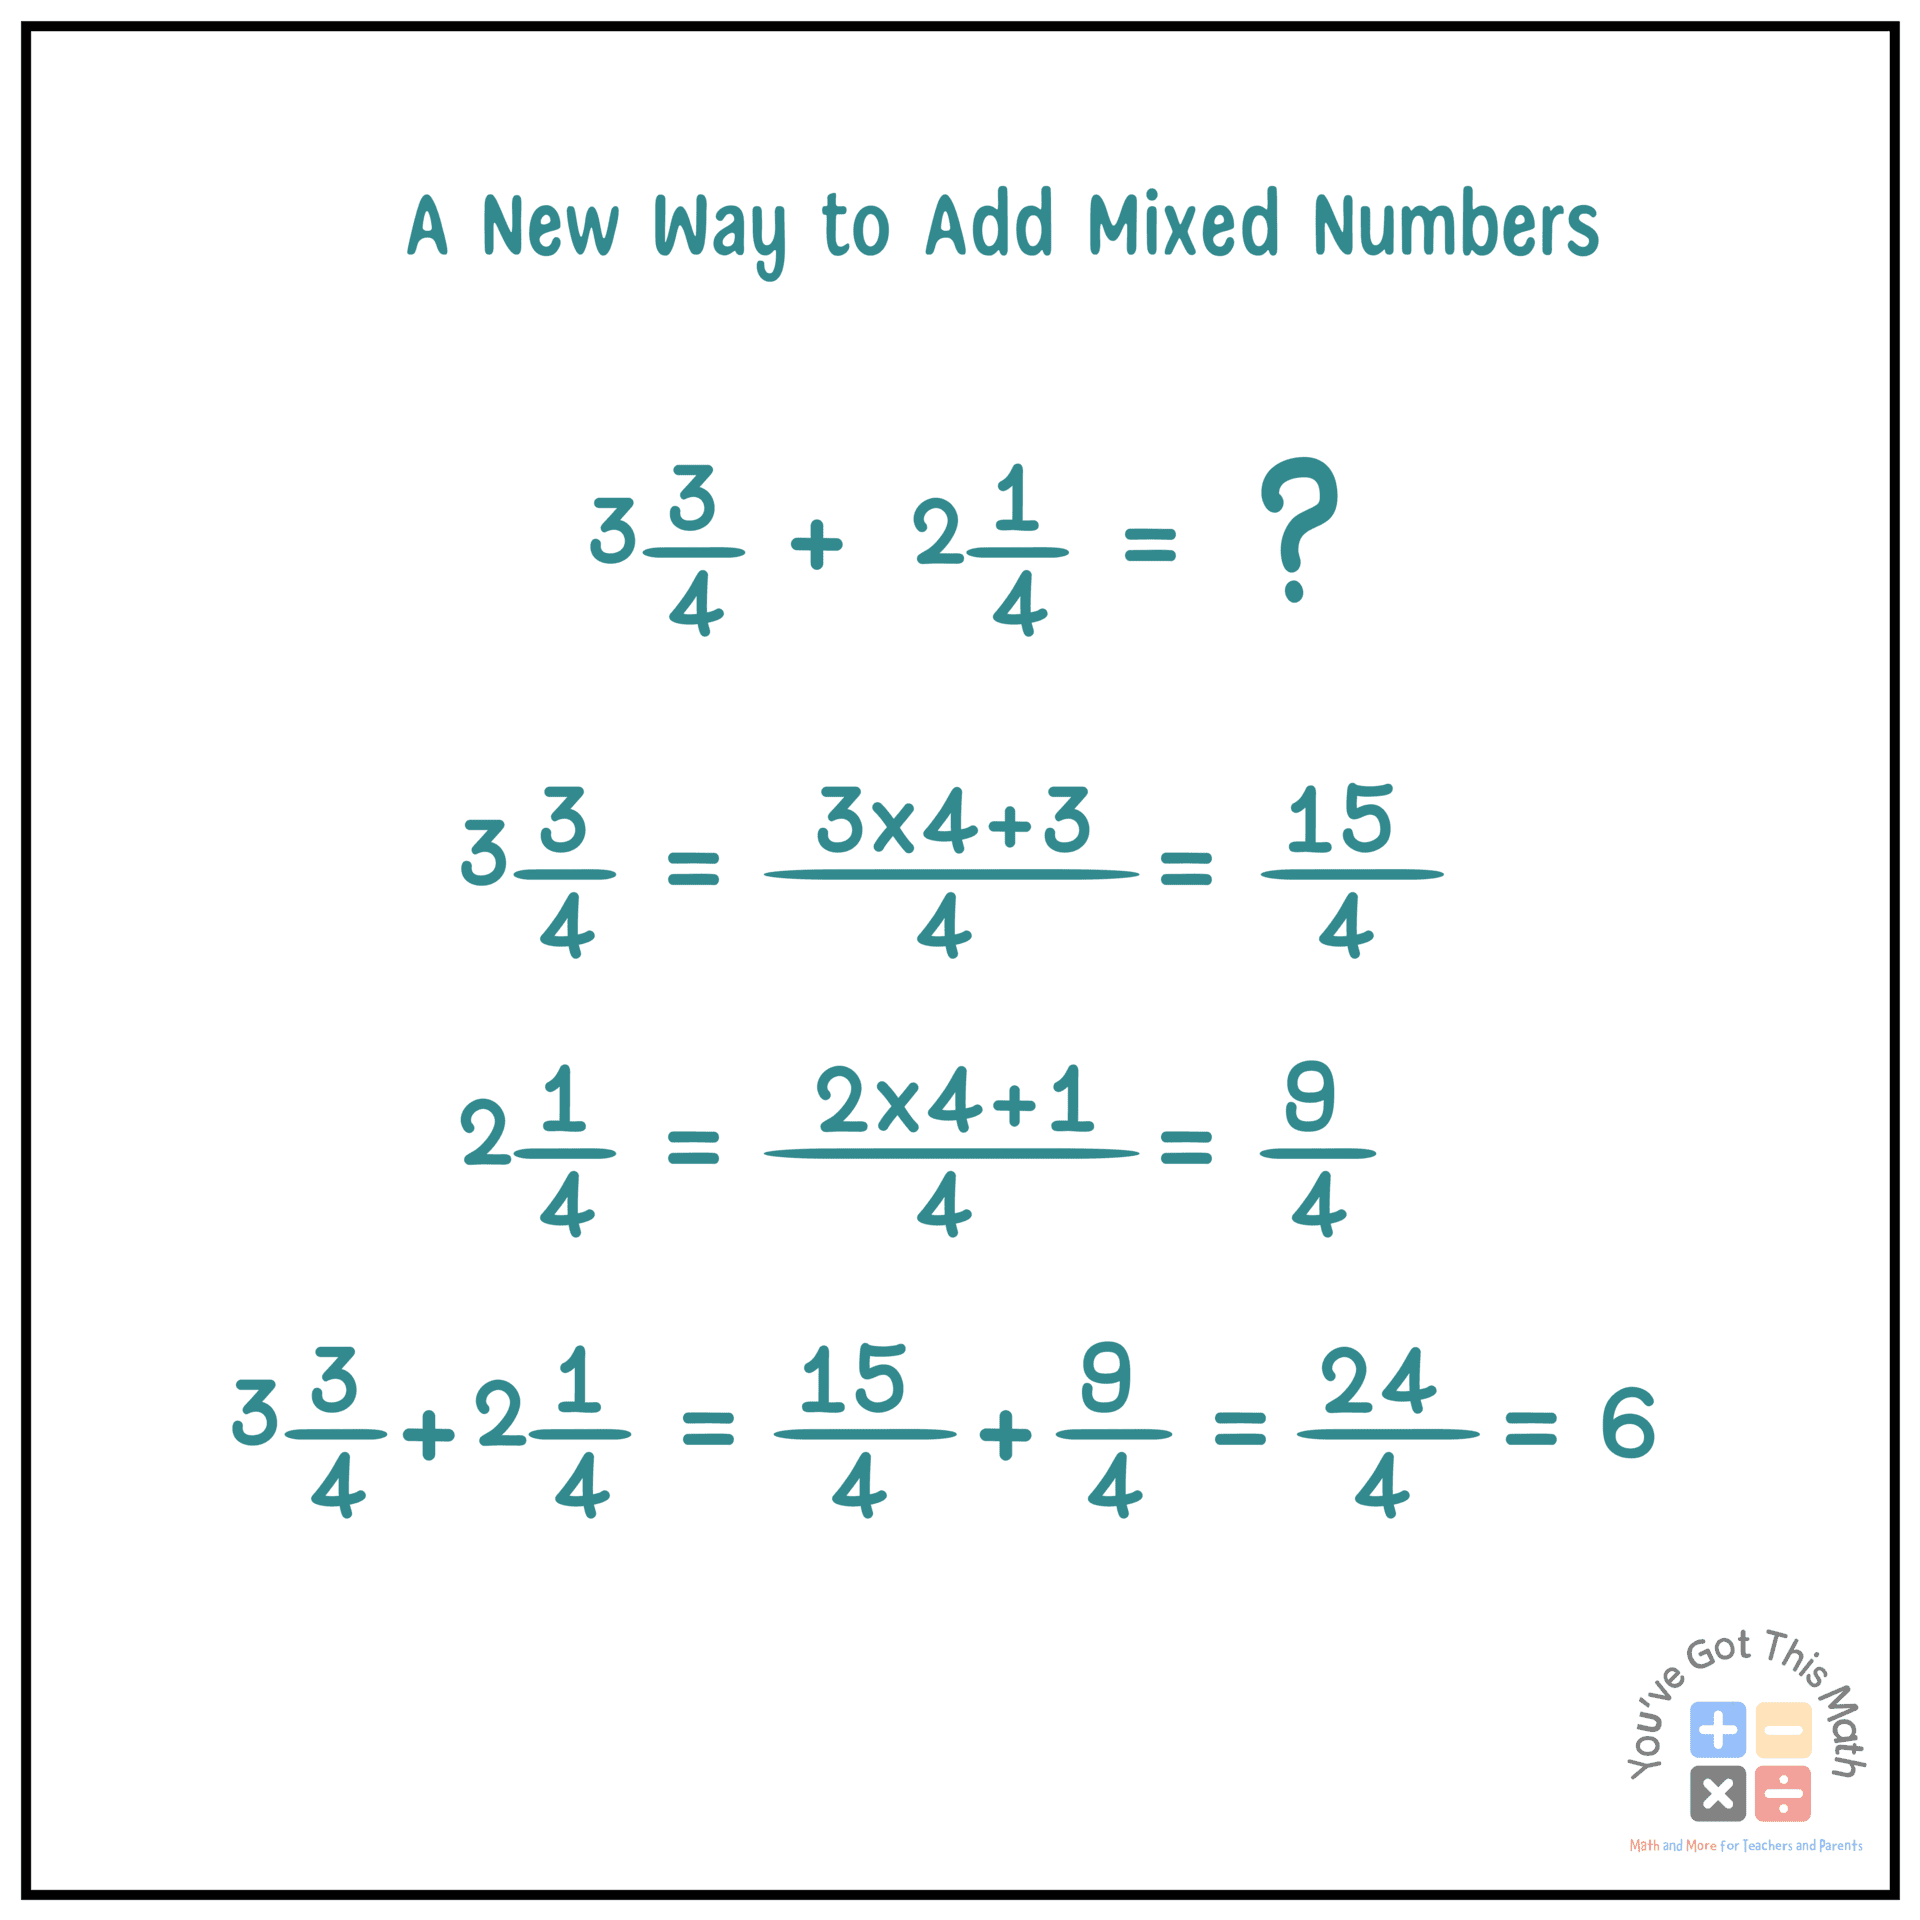 A new way to add mixed numbers